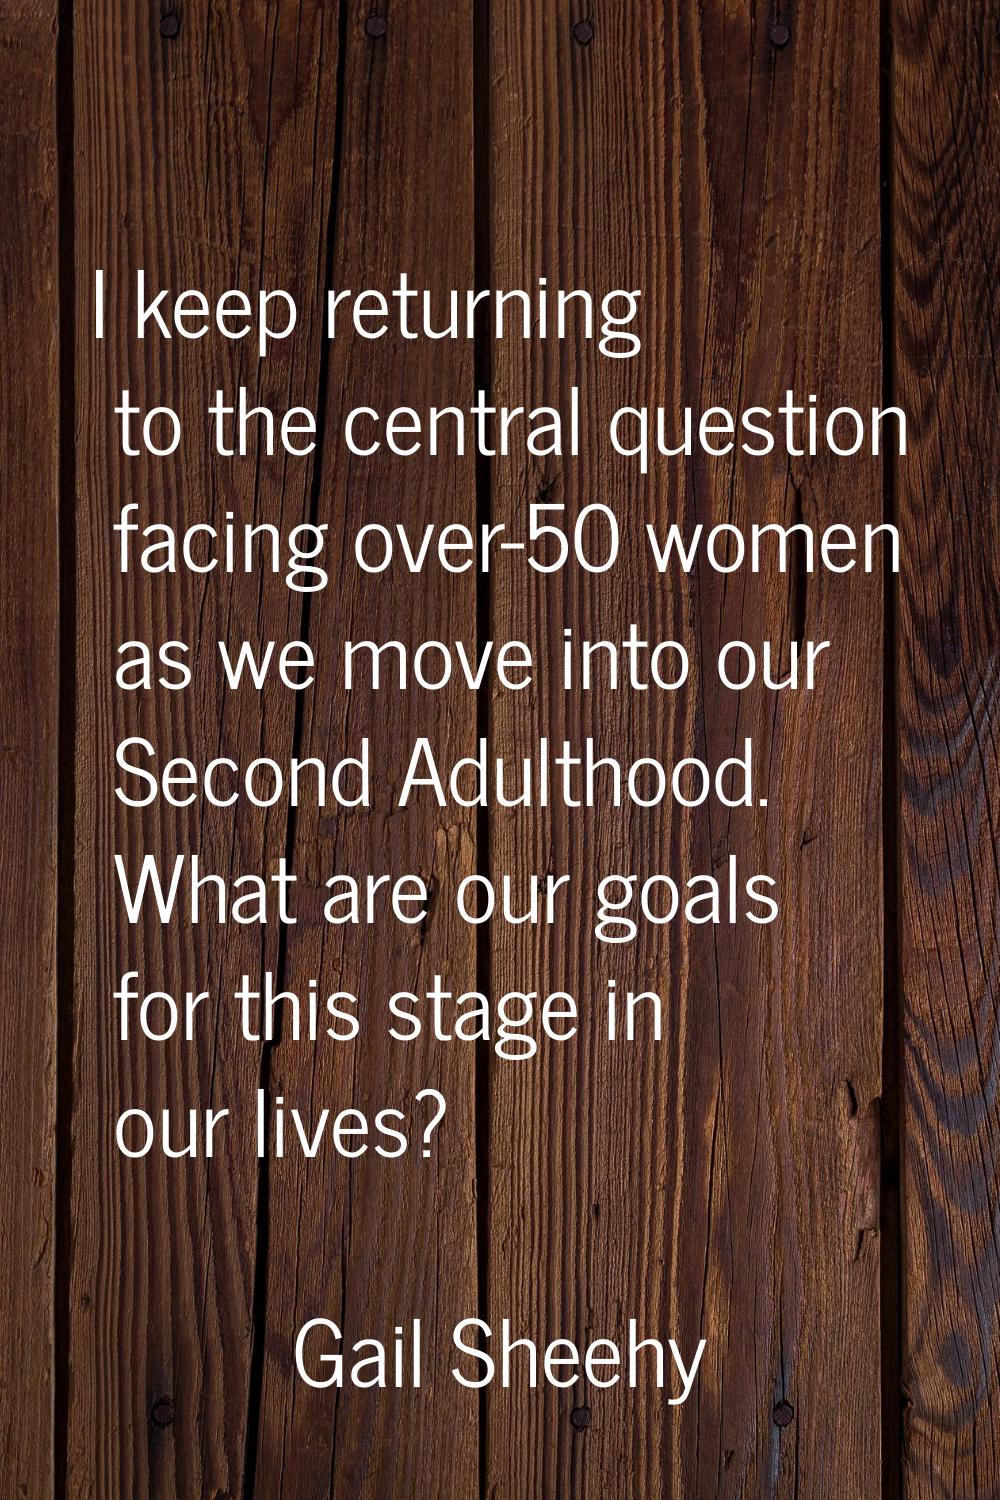 I keep returning to the central question facing over-50 women as we move into our Second Adulthood.